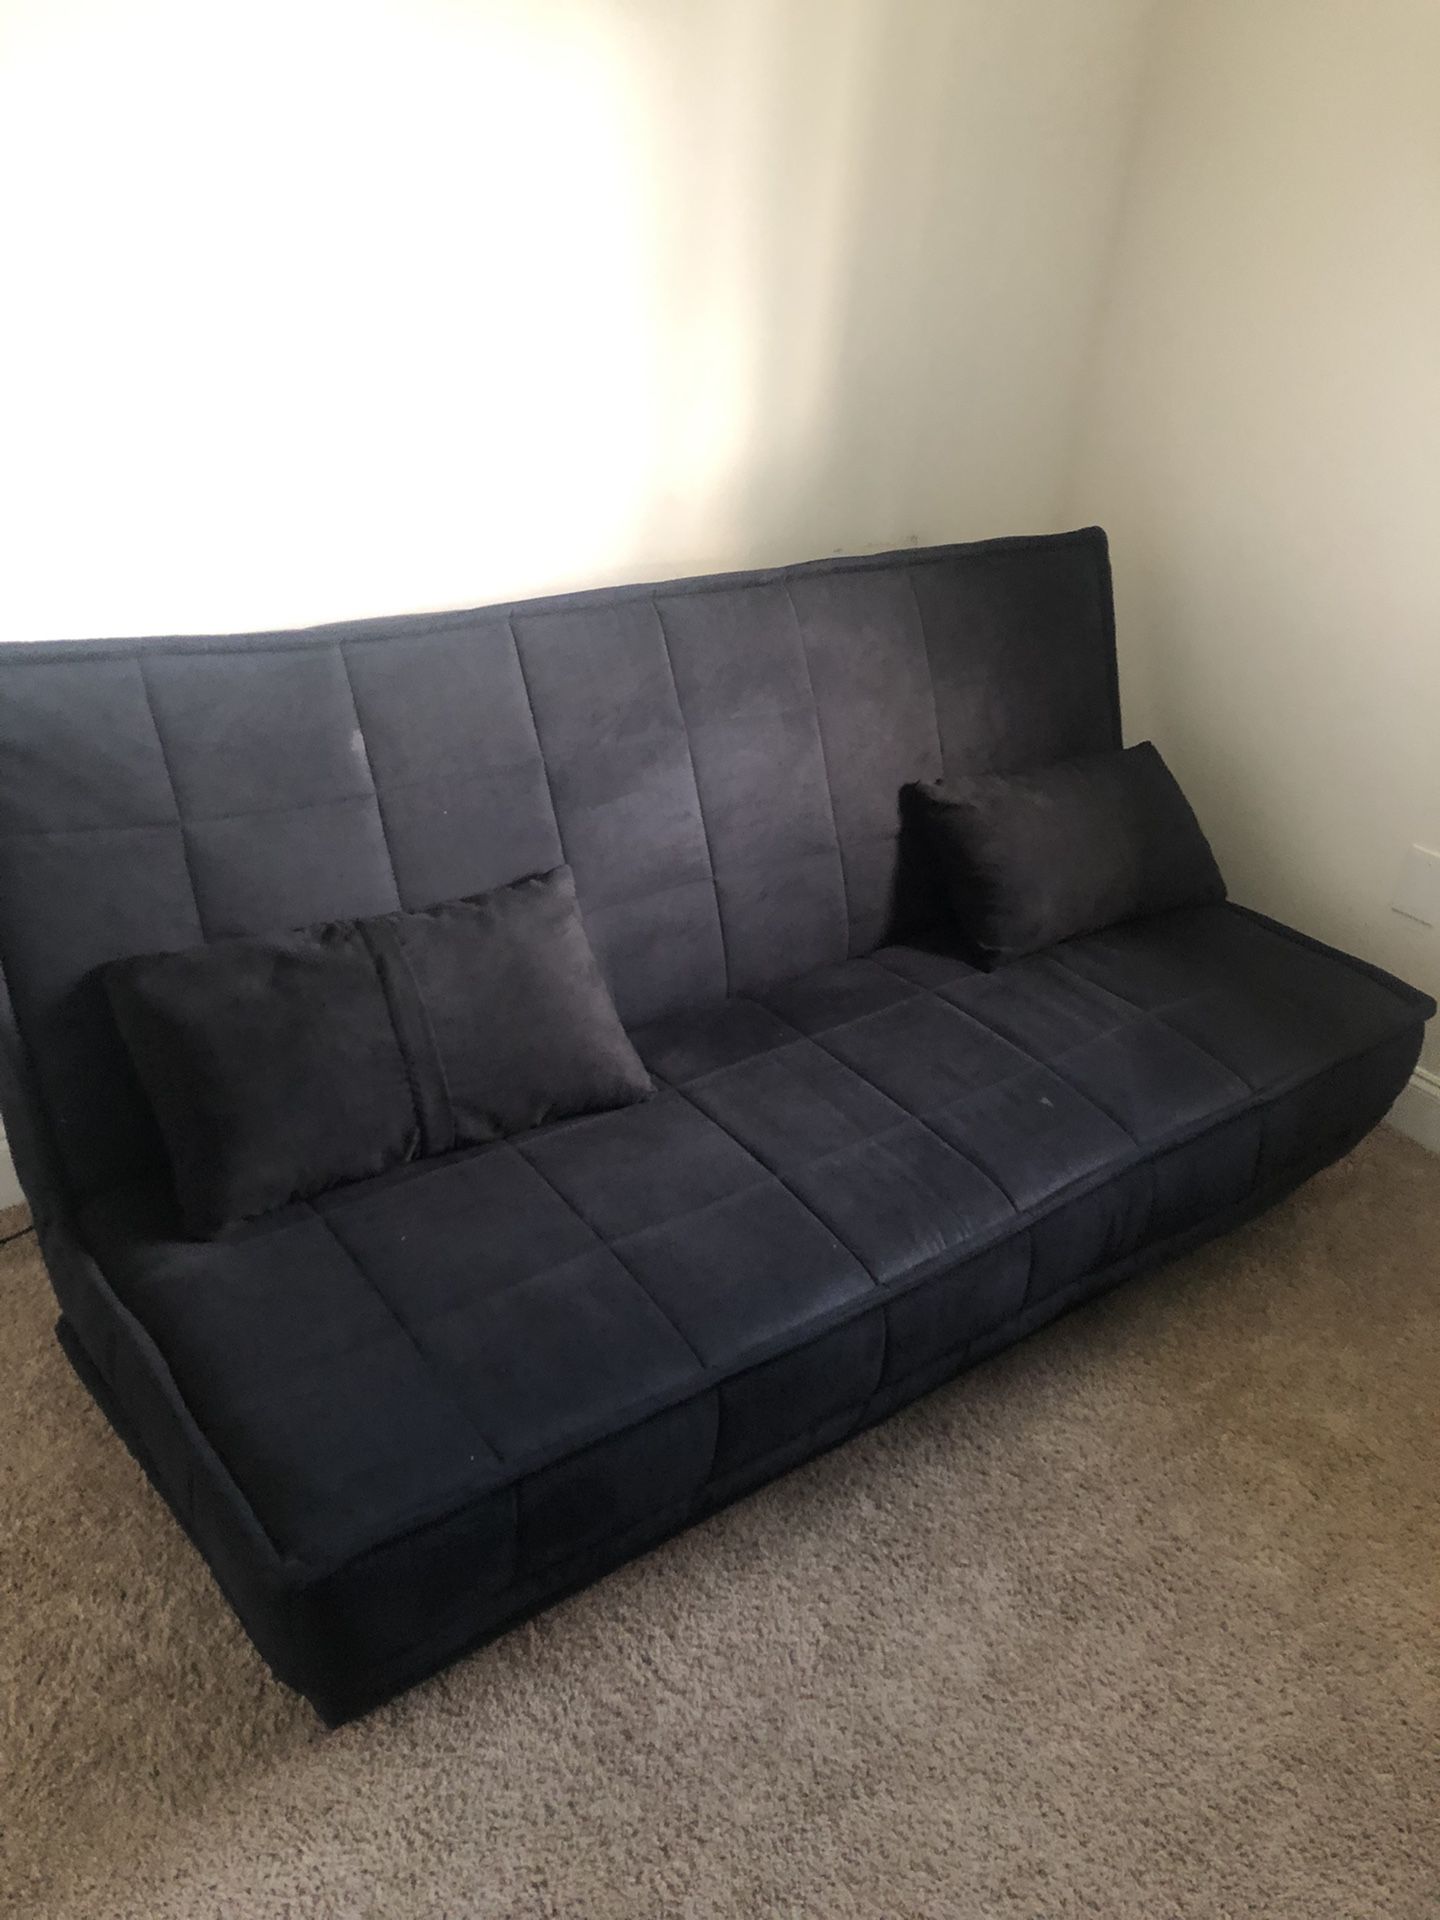 Great Condition Futon/bed